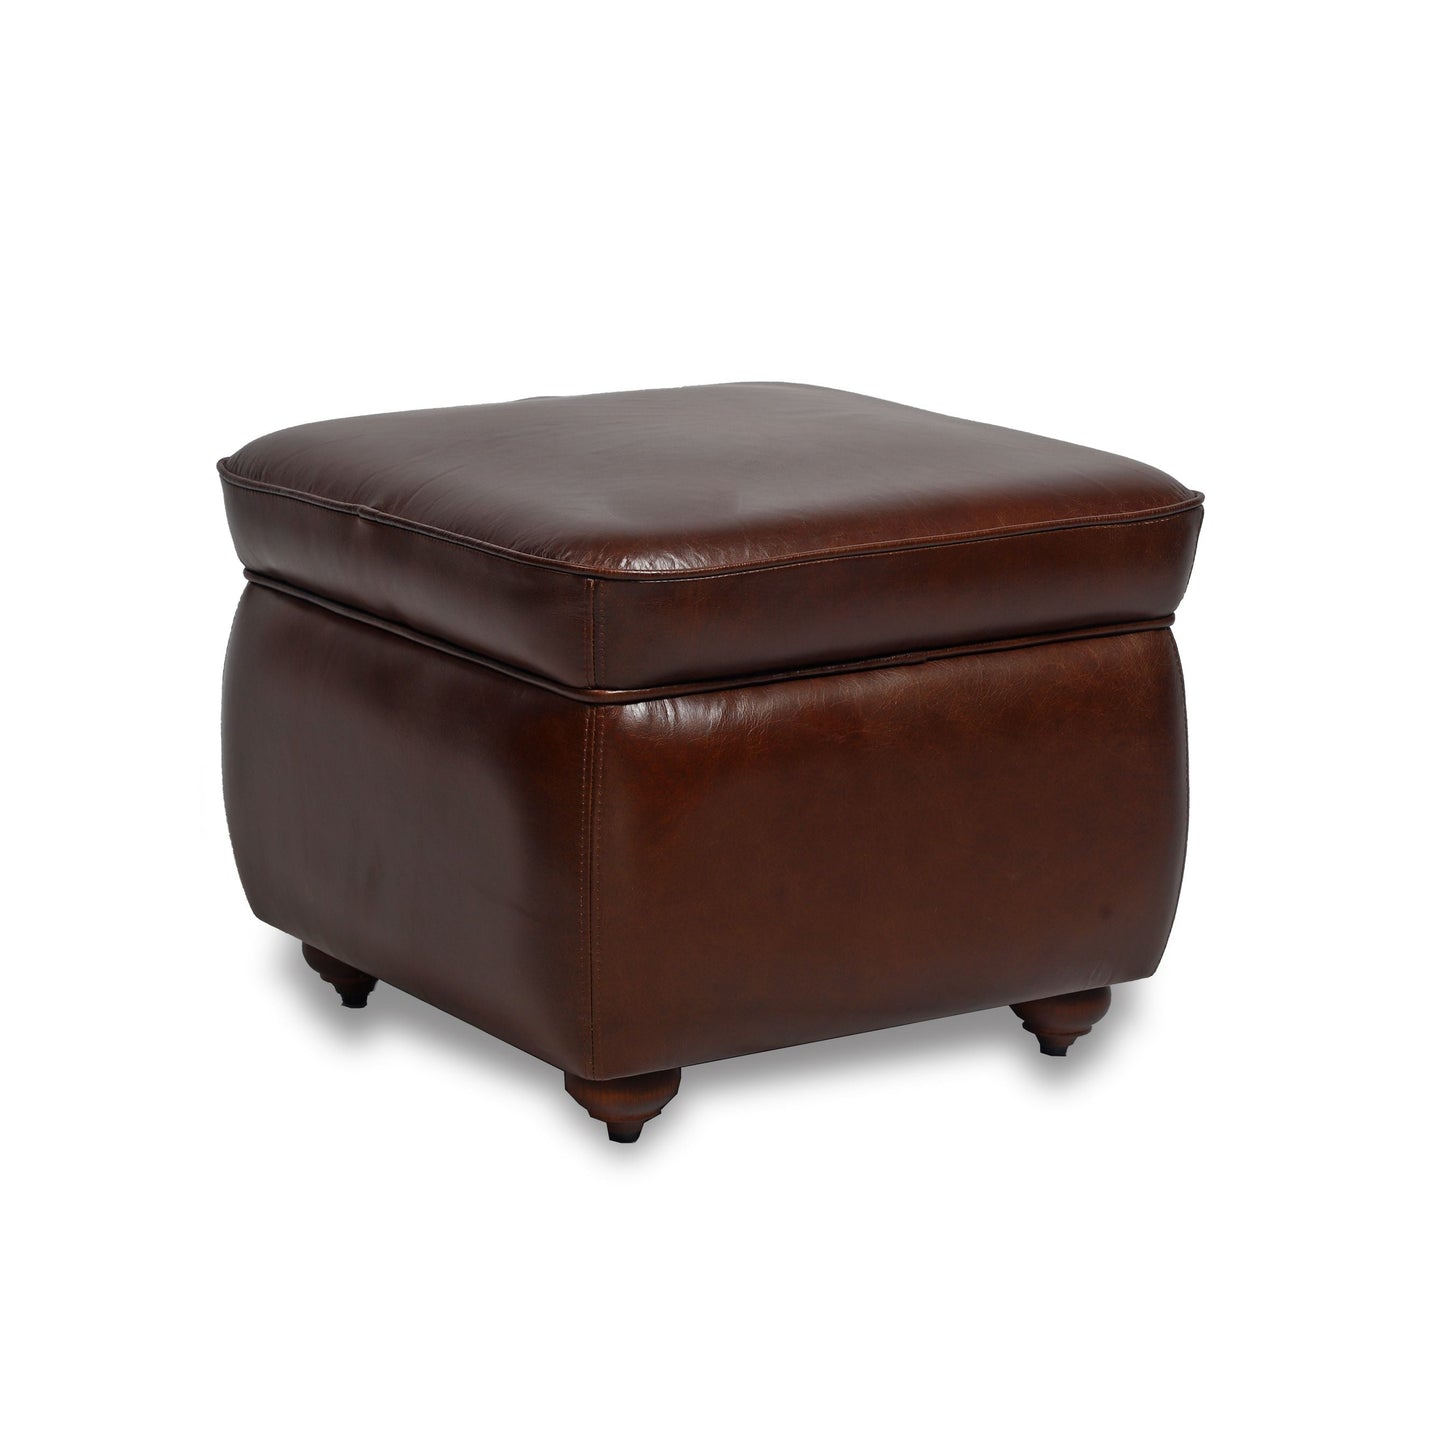 Genuine Leather Foot Stool In Brown Colour